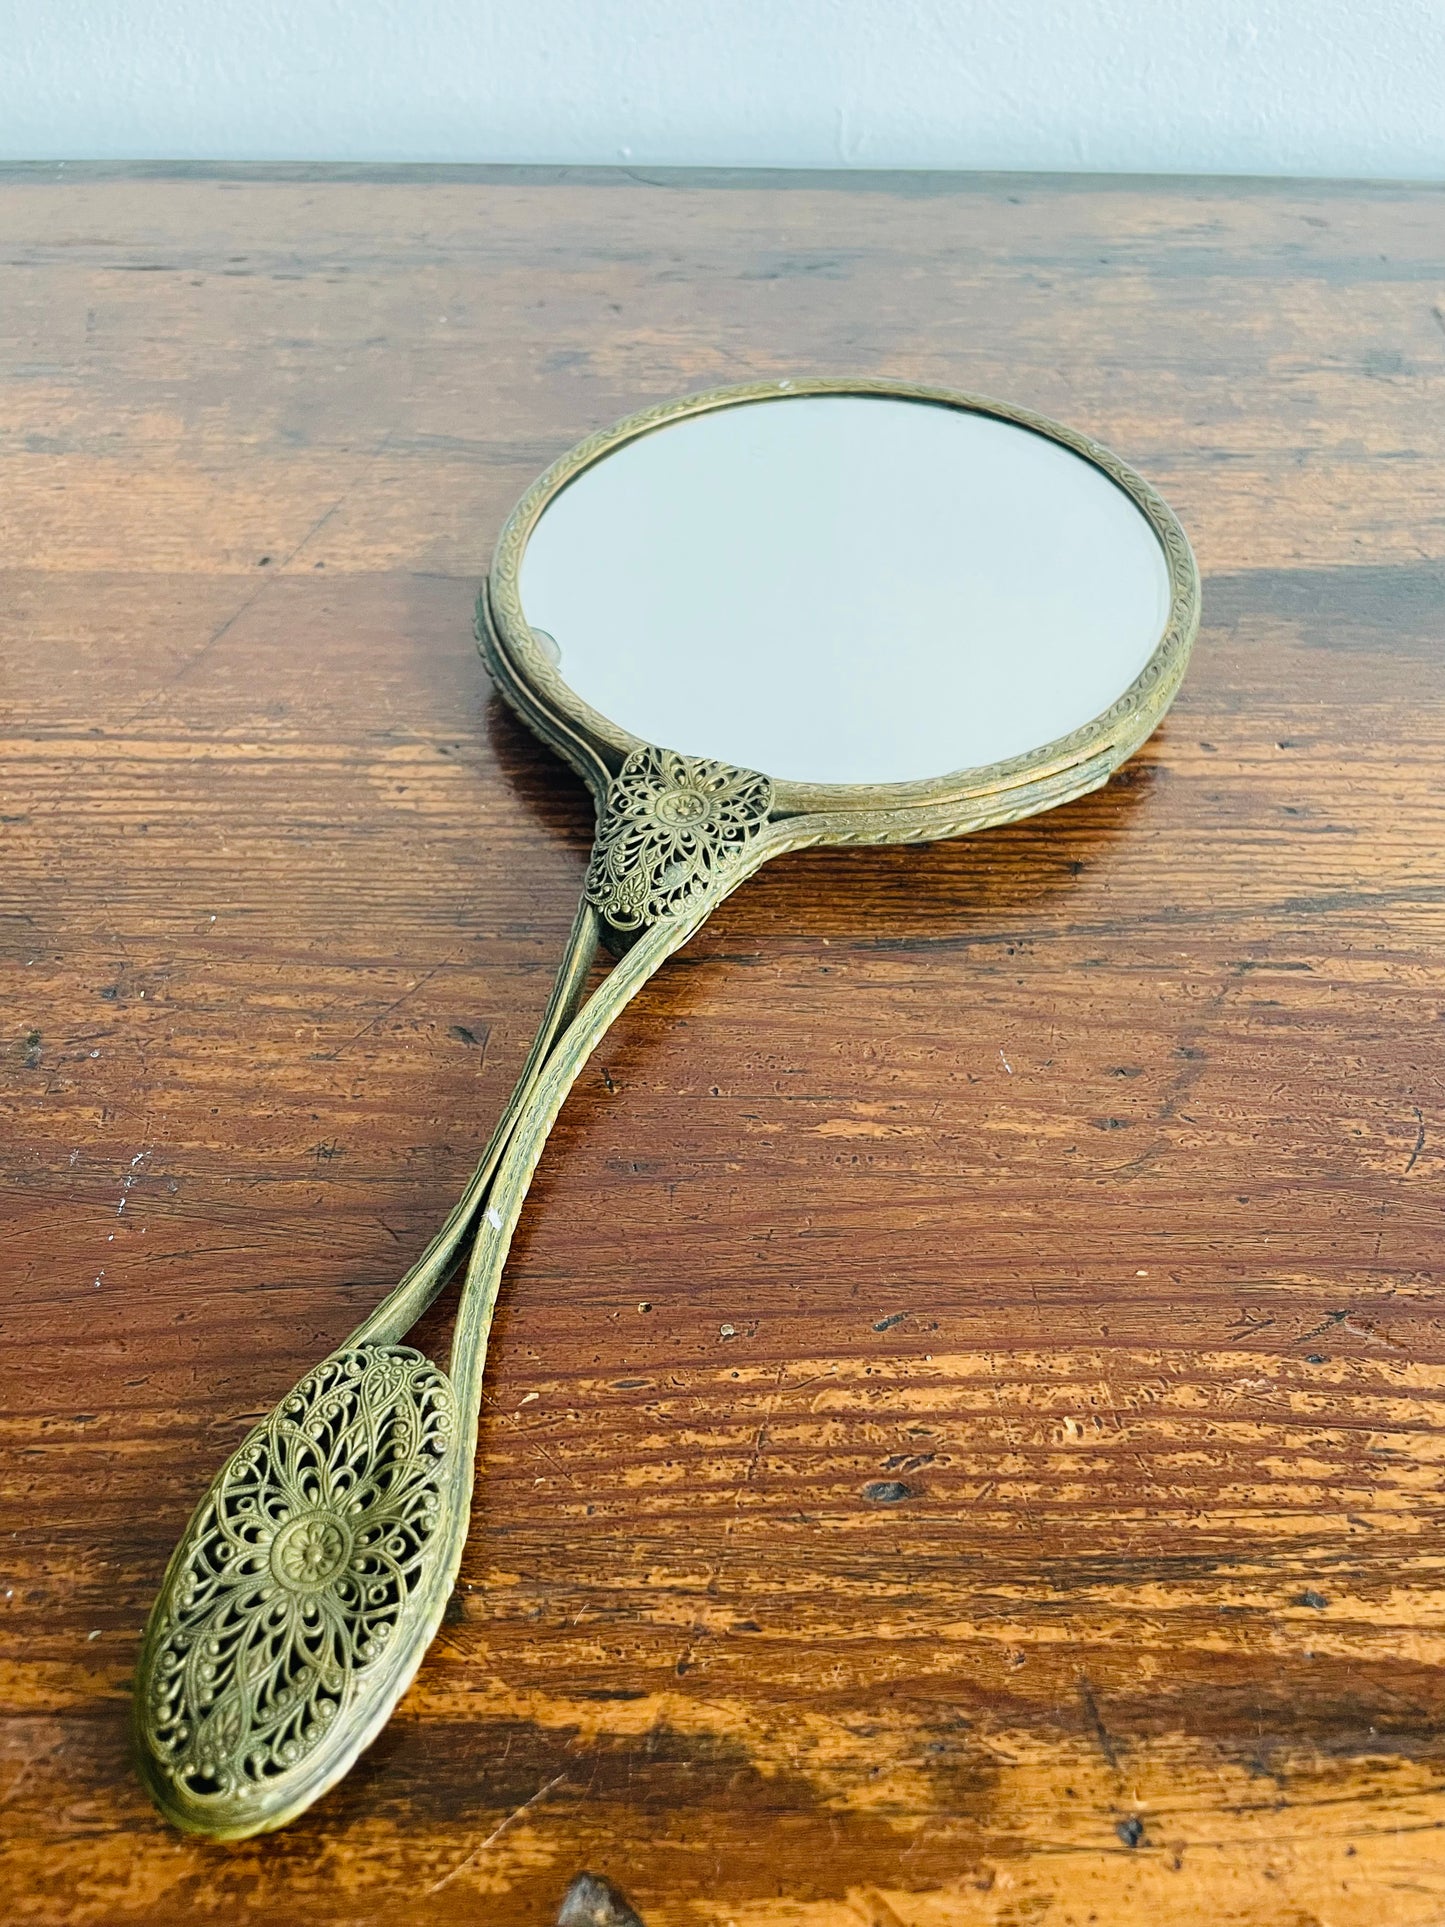 Antique Belle Epoque Handheld Vanity Mirror with Ornate Brass Filigree & Embroidered Floral Tapestry Fabric